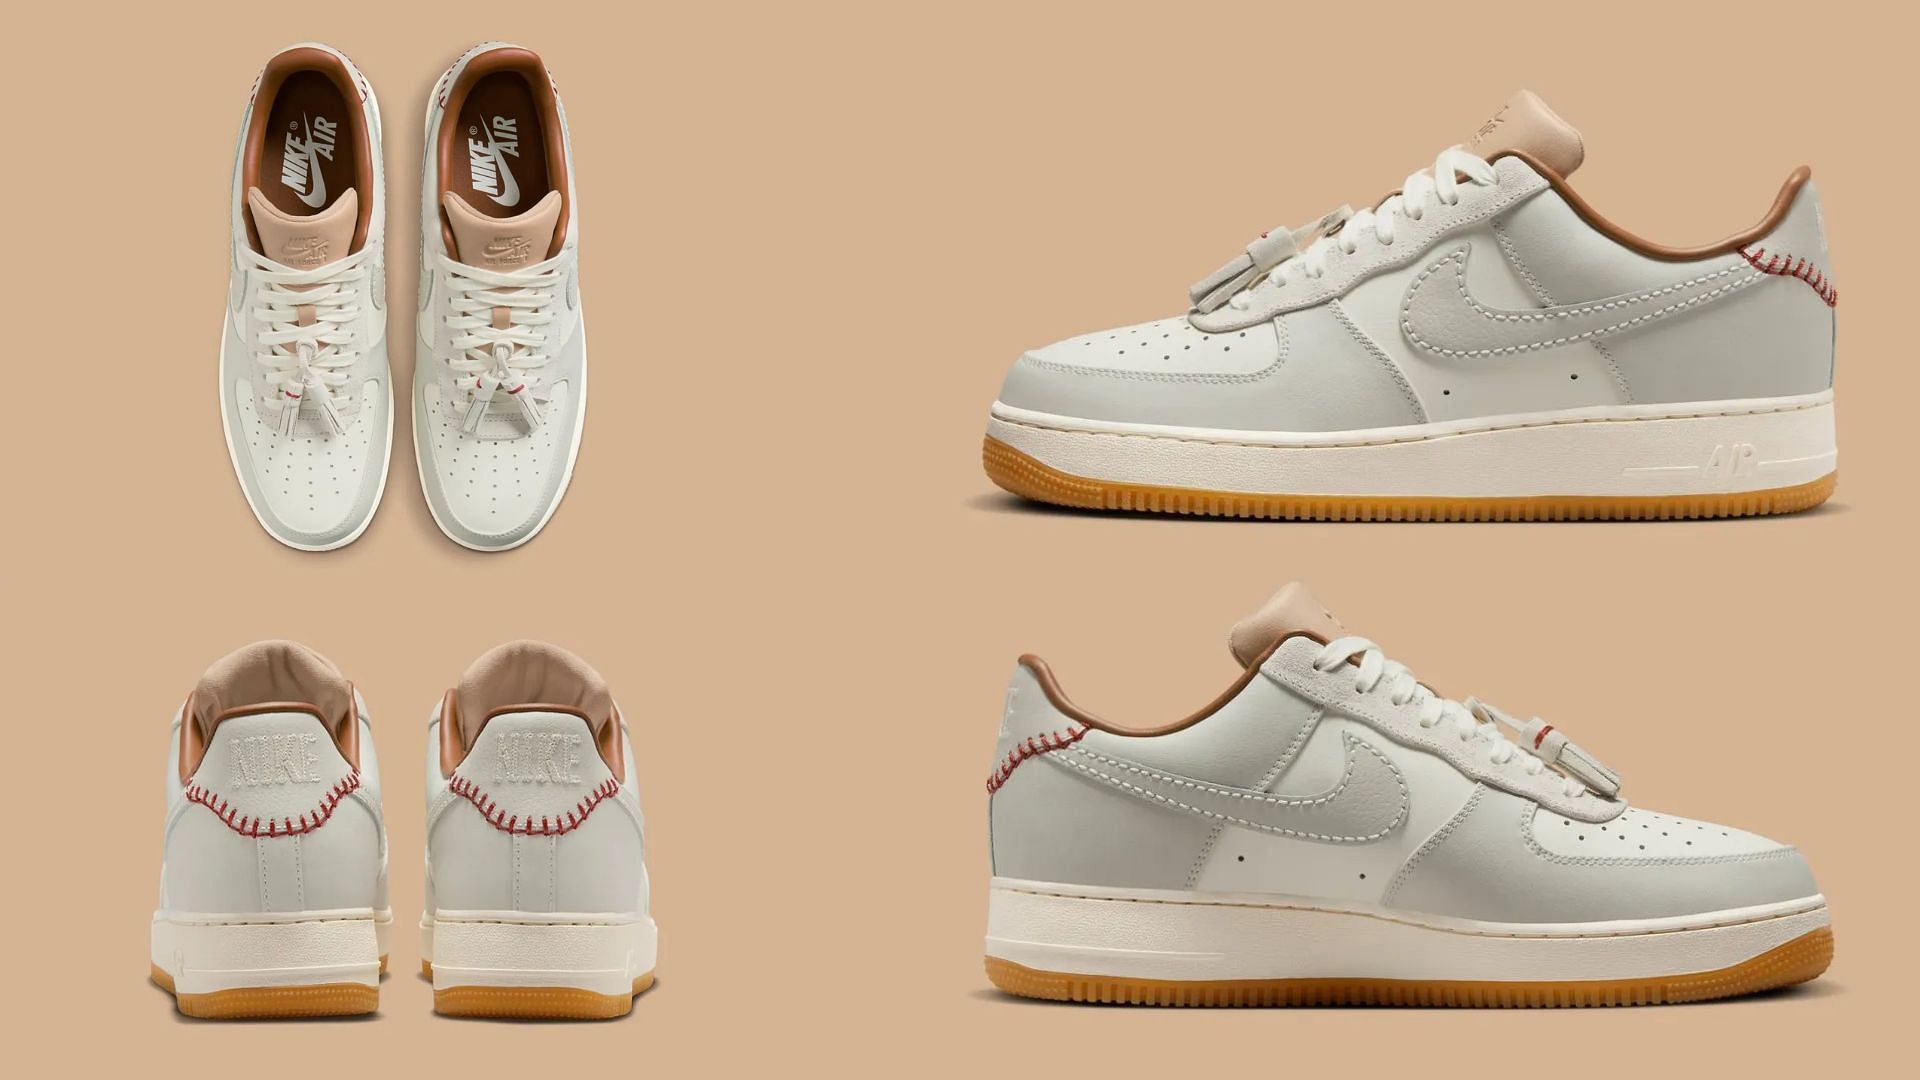 A closer look at the Nike Air Force 1 Low Leather Tassels (Image via YouTube/@inboxtogo)